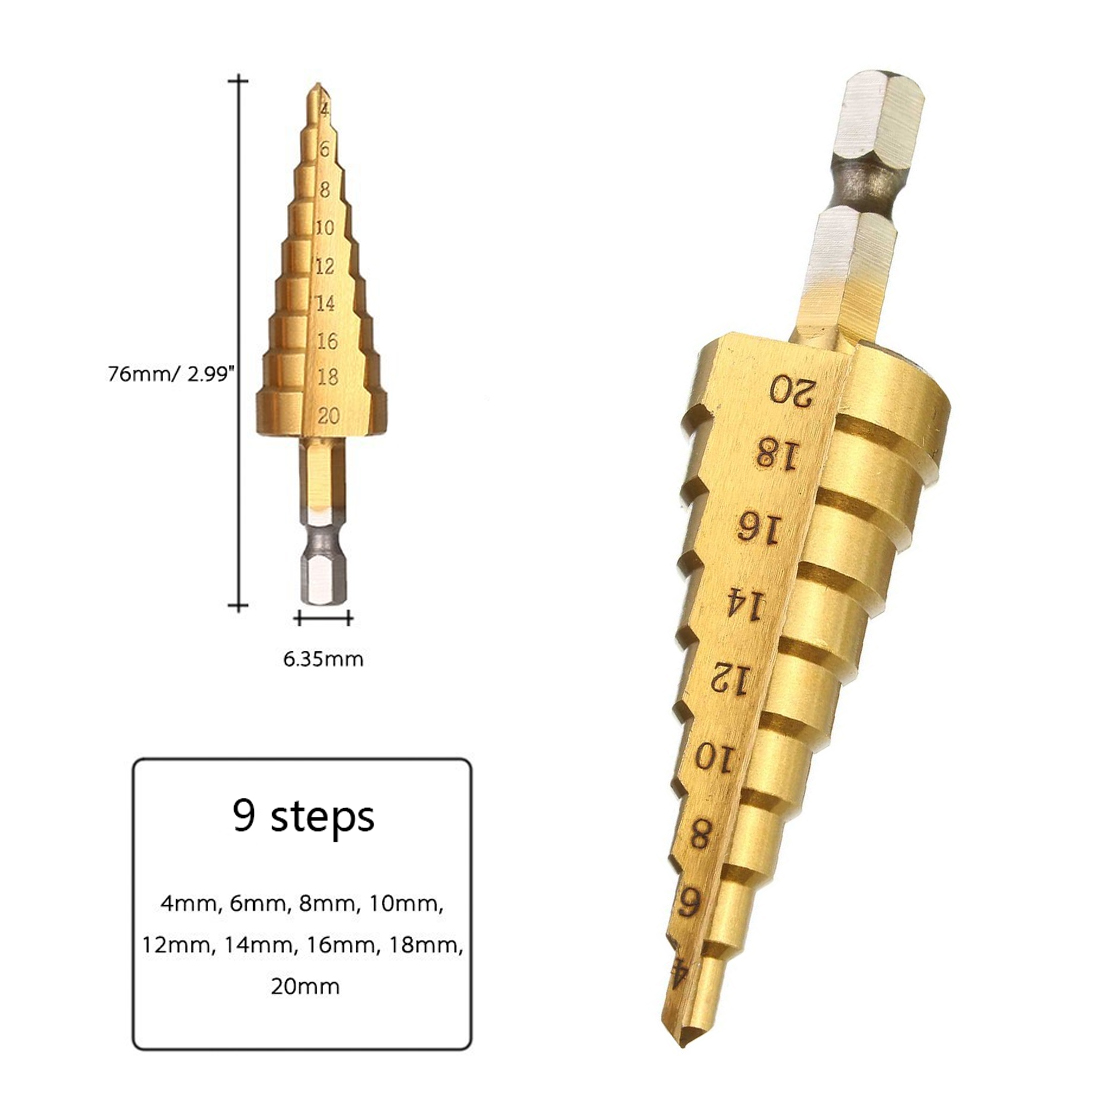 4-20mm Metric Titanium 4241 High Speed Steel Step drill Bits For Metal Hex HSS Tapered Drill Bits for Aluminum Iron Wood